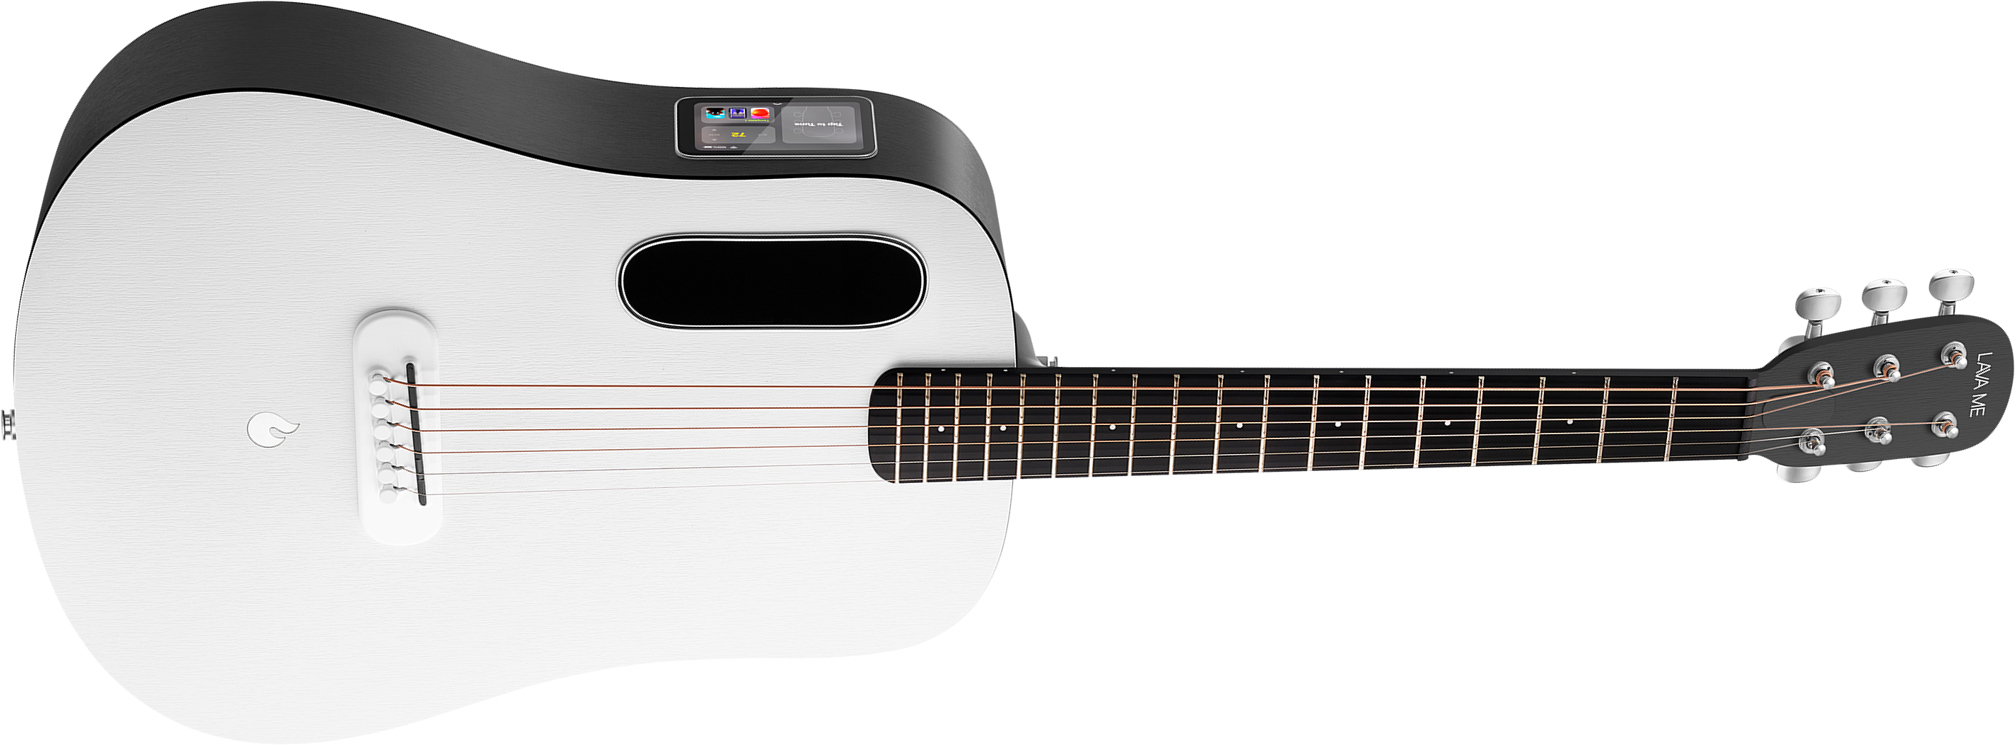 Lava Music Lava Me Play 36 +lite Bag - Nightfall / Frost White - Travel acoustic guitar - Main picture